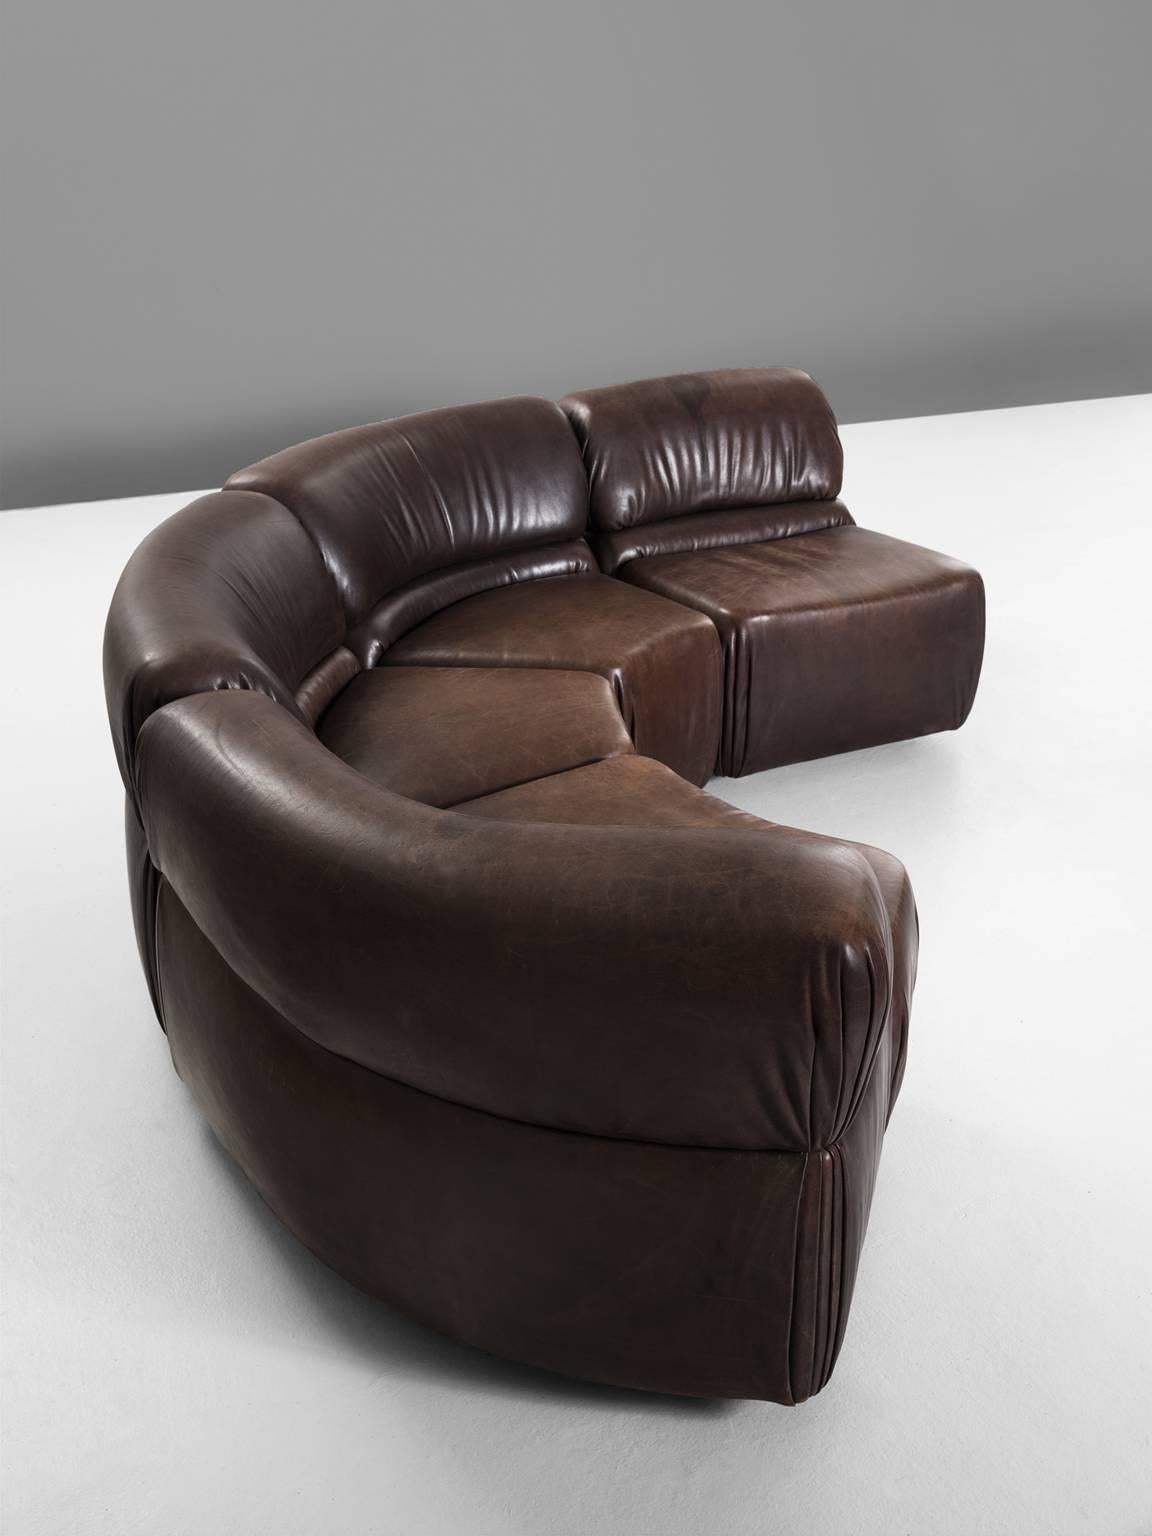 DeSede 'Cosmos', dark brown leather, four elements, 1970s.

Very exclusive modular sofa made by De Sede in Switzerland in the 1970s. Due to the seperate elements, the couch can be used in a variety of different positions. The high quality leather